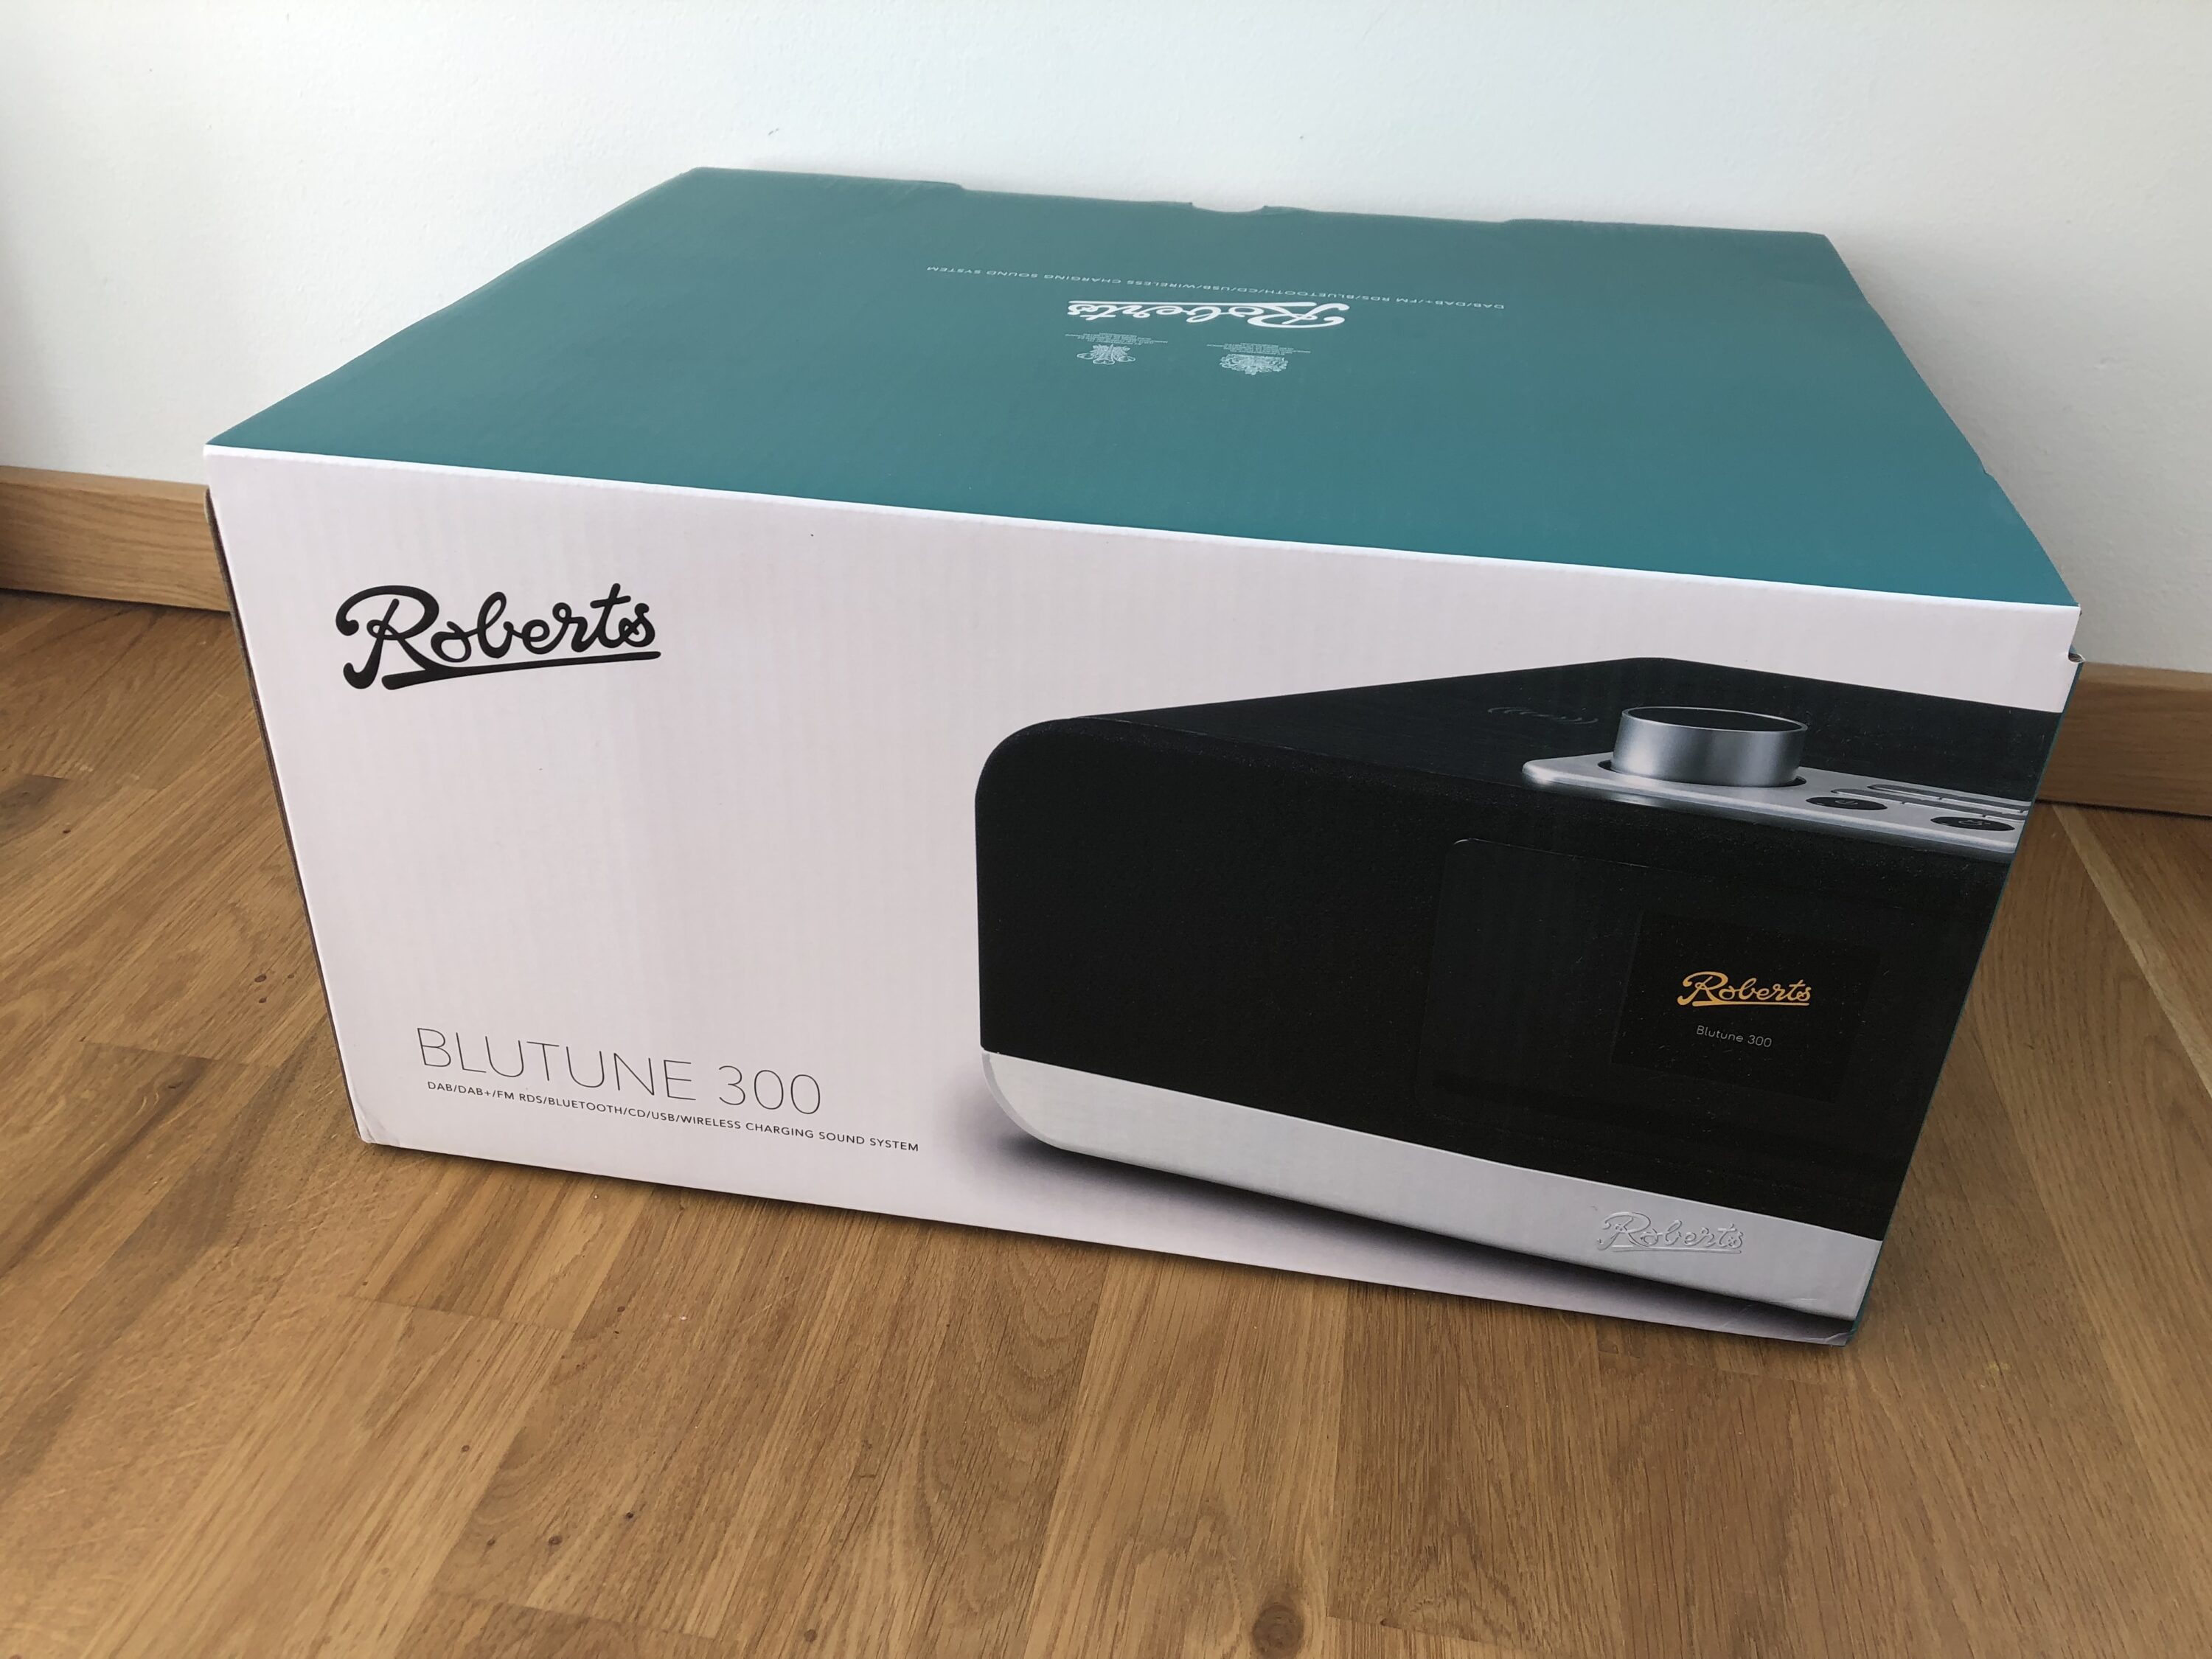 Roberts BluTune 300 review: State-of-the-art radio technology?